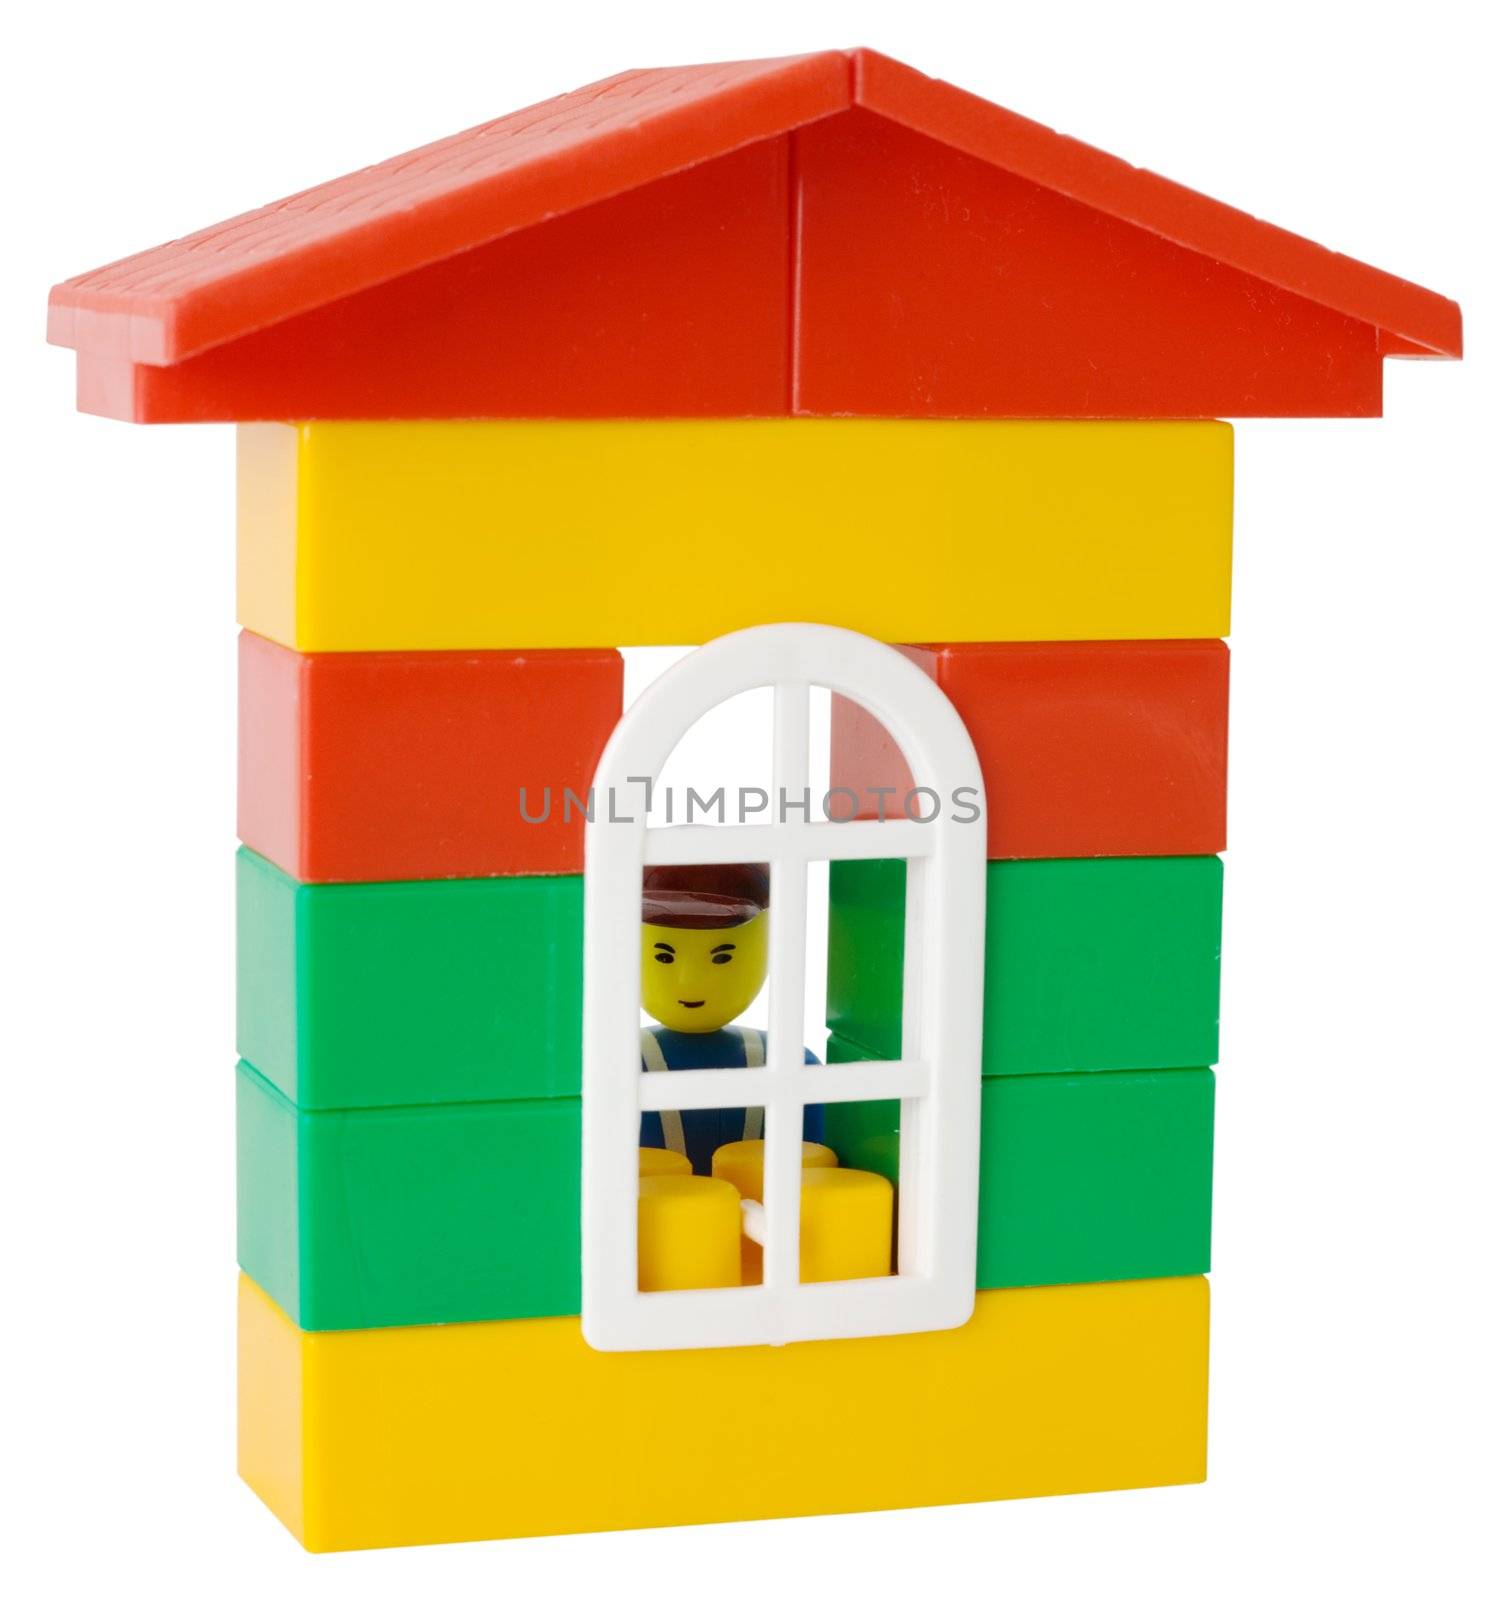 Little man and toy house on the white background